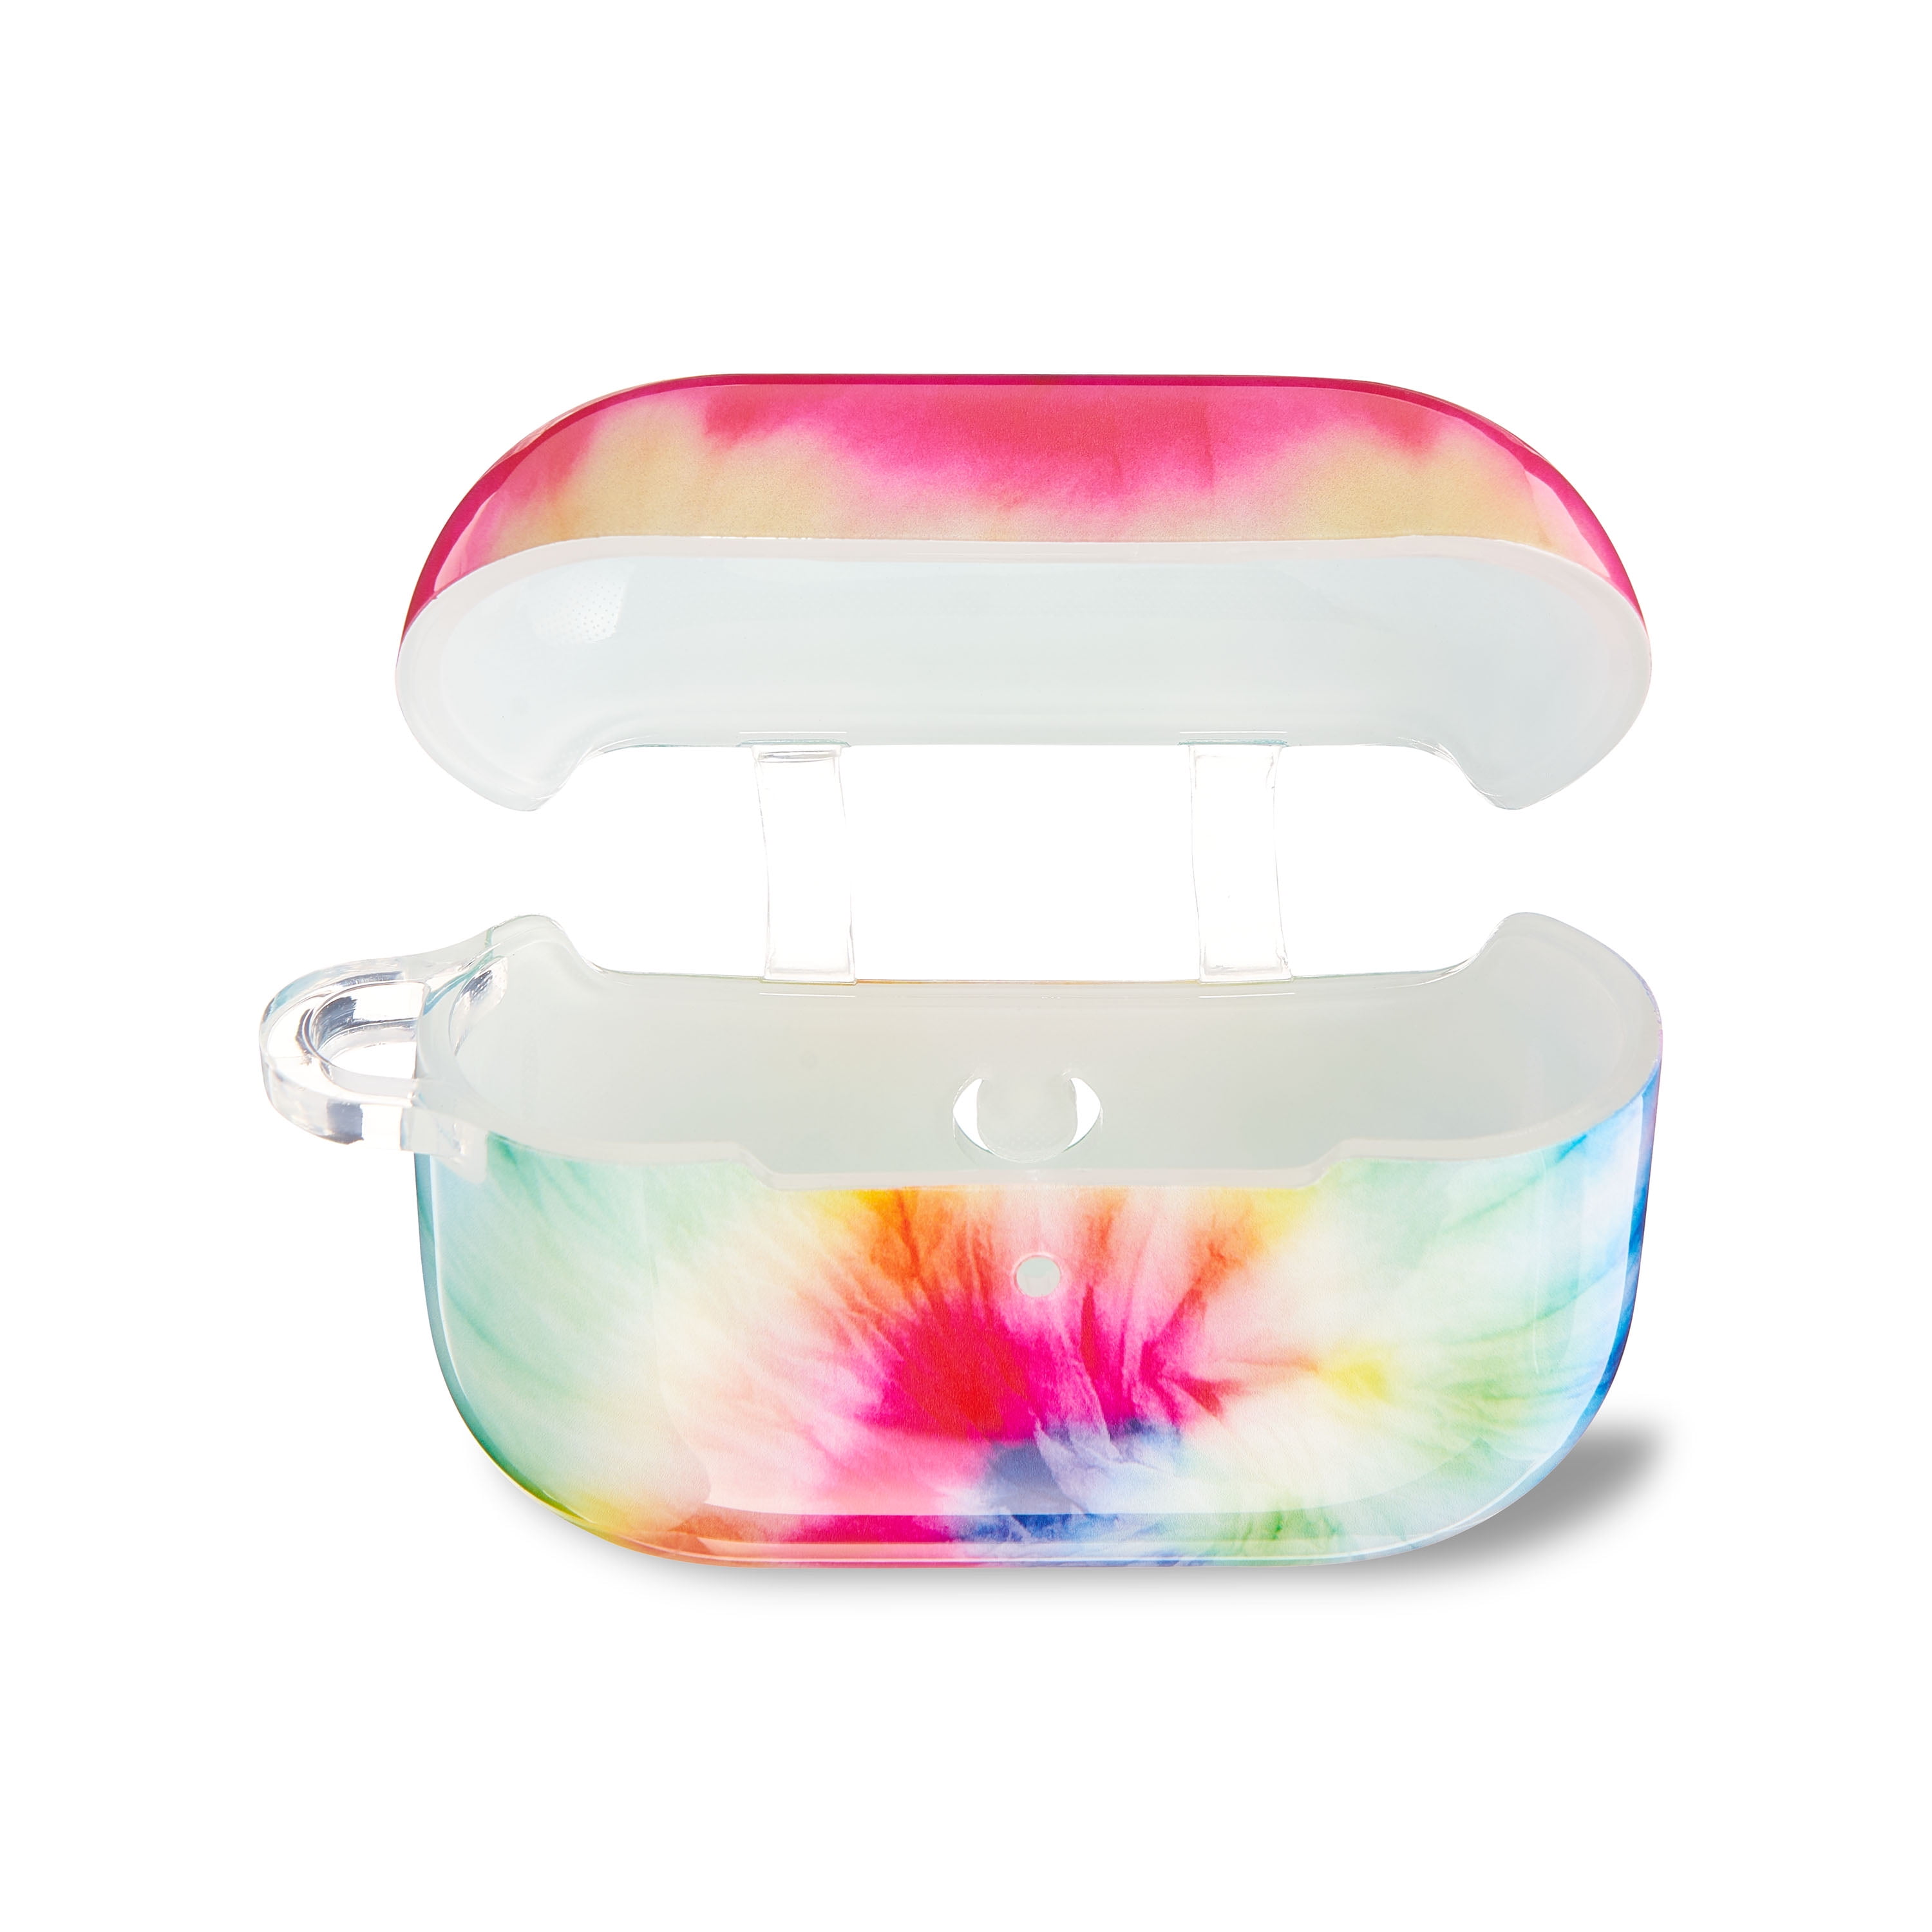 onn. Charging Case Cover for Apple AirPods Pro, Tie Dye